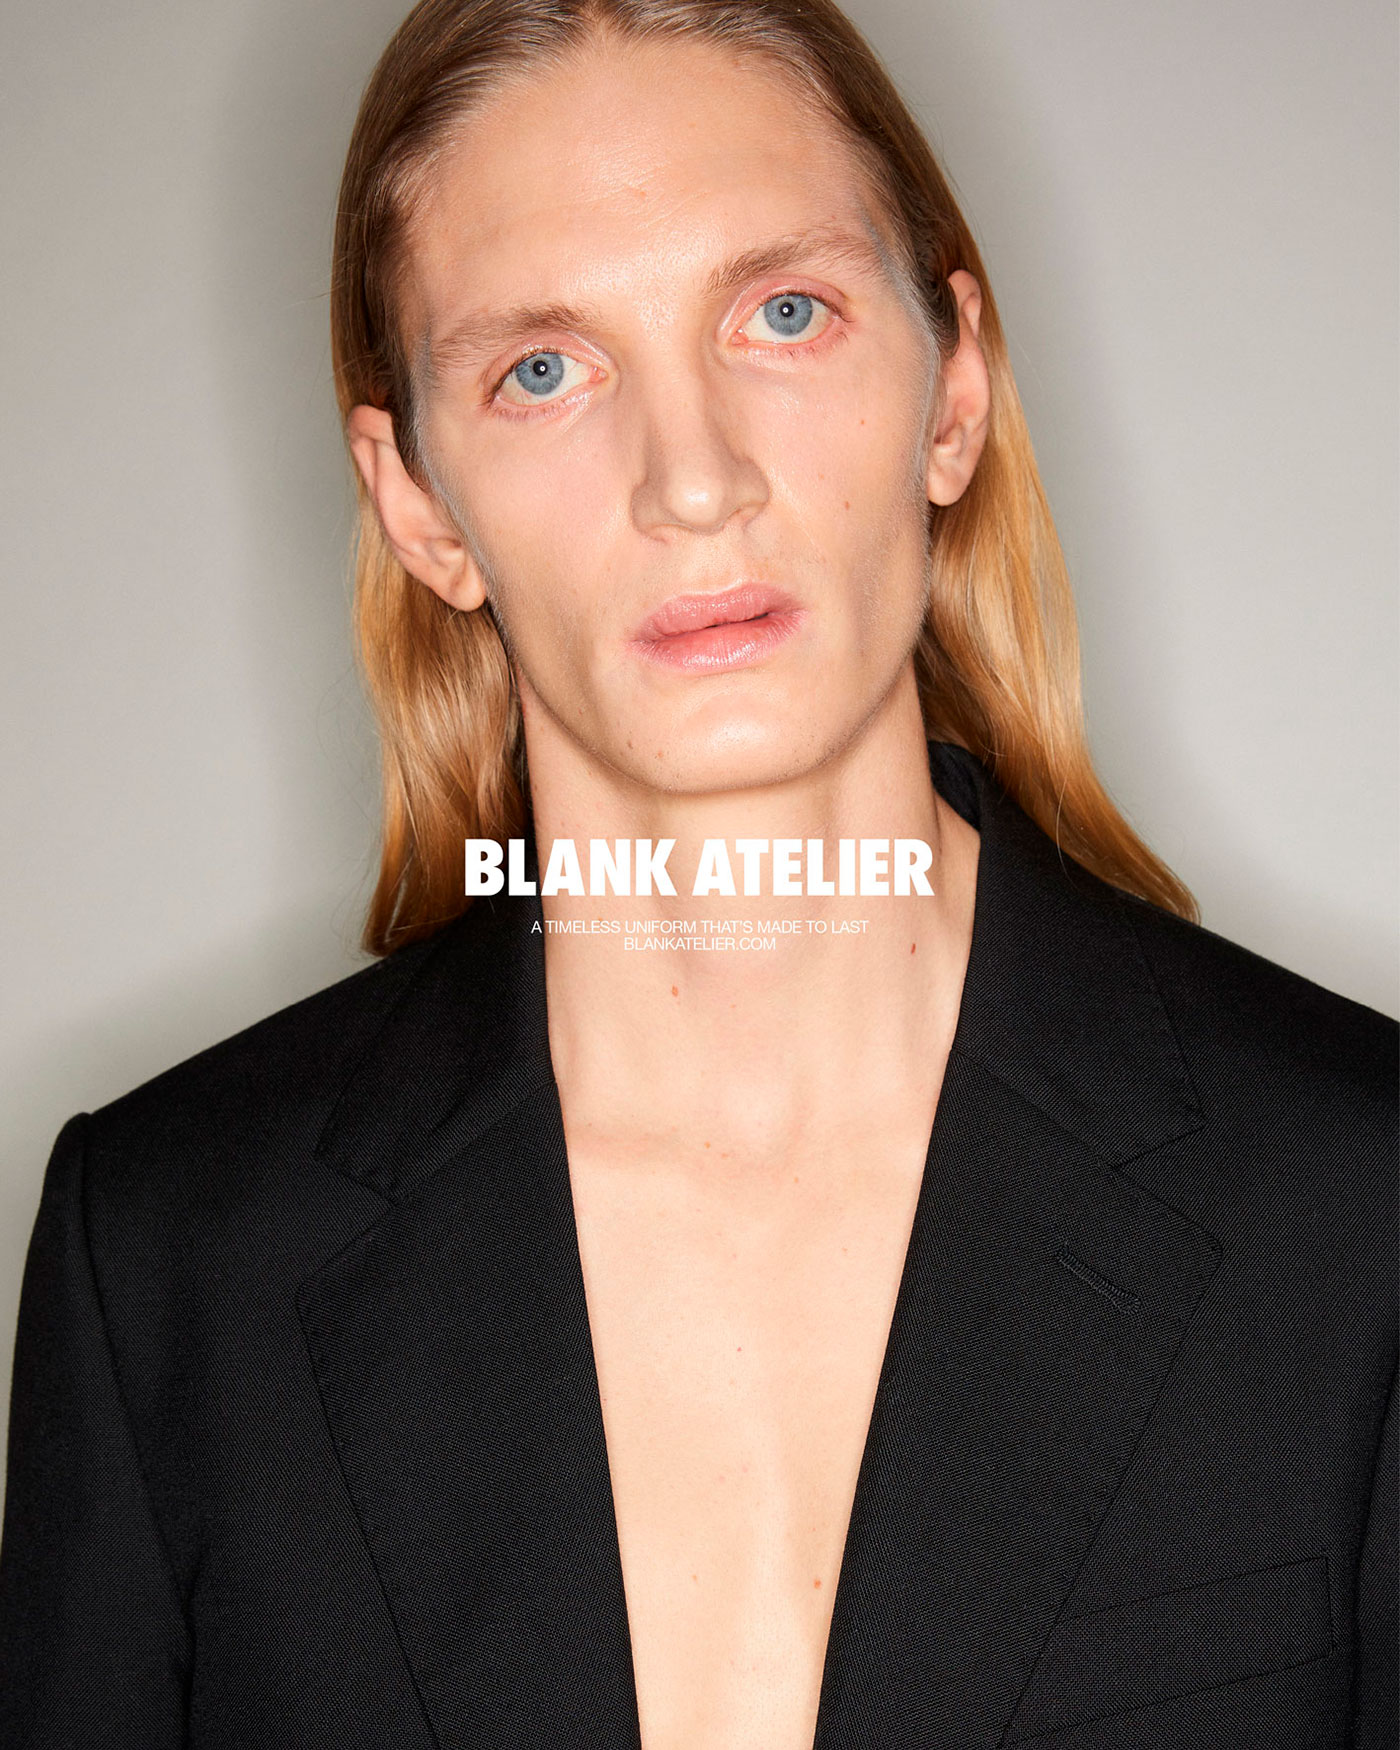 Blank Atelier – Campaign AD